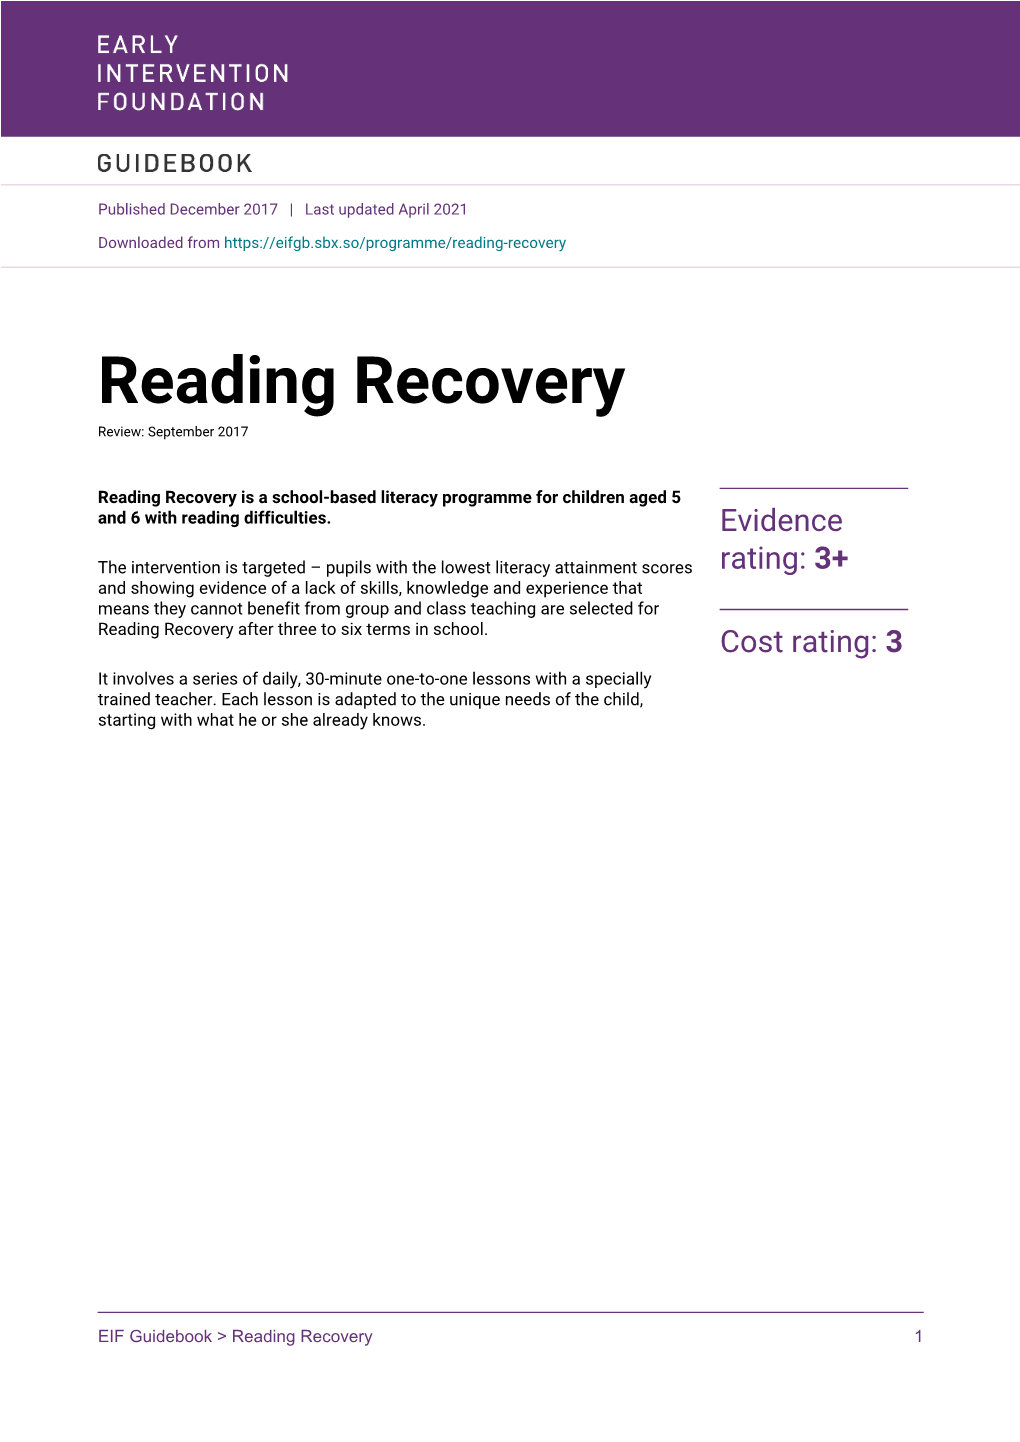 Reading Recovery Review: September 2017